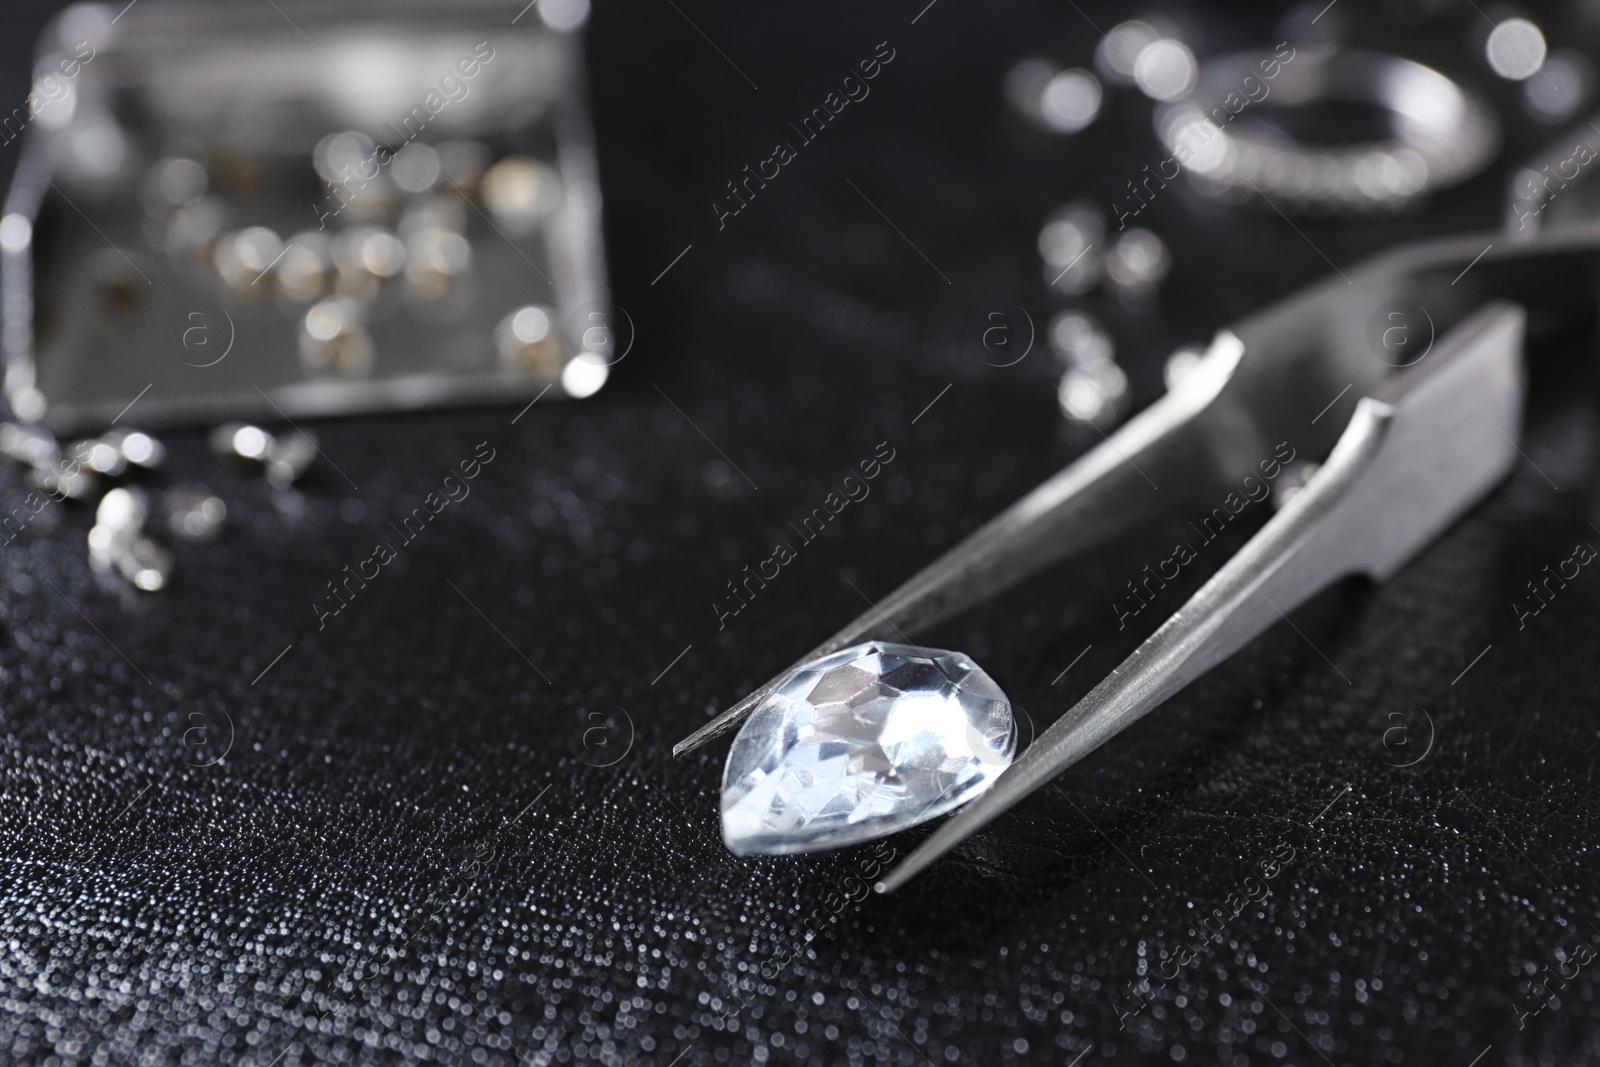 Photo of Jewel and tweezers on black leather surface